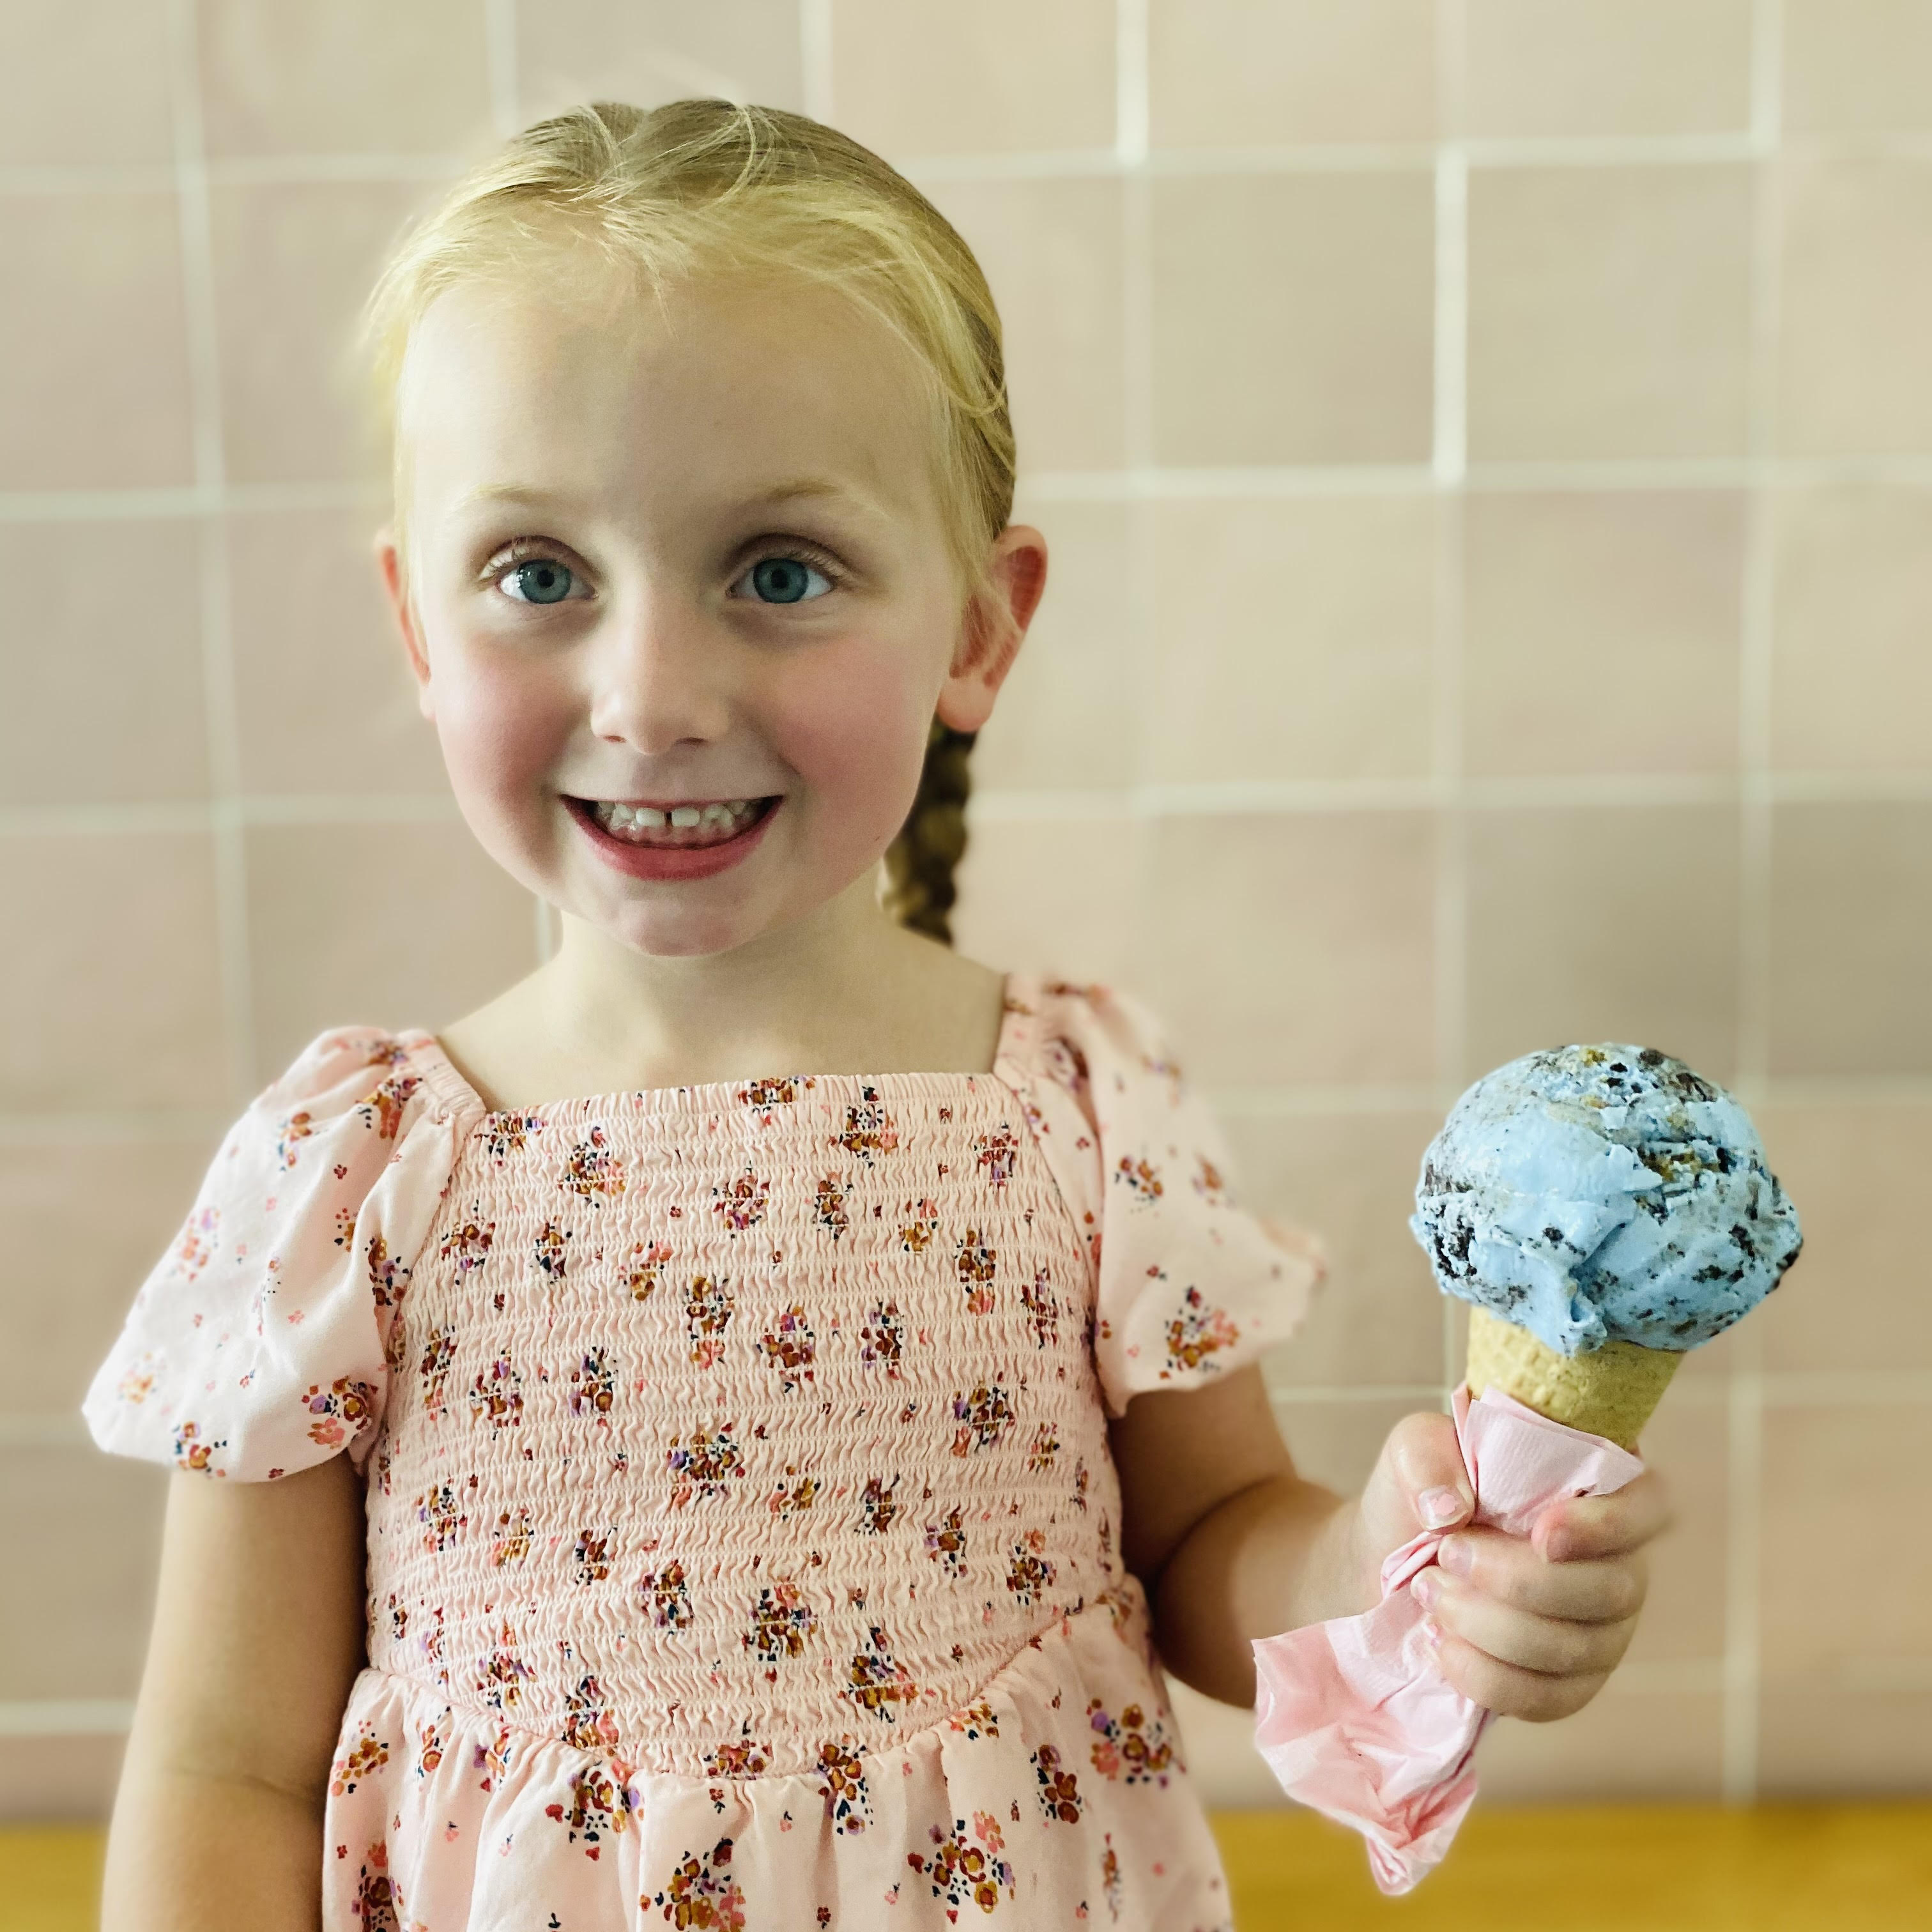 There are so many fun things to do in Fort Worth with kids like eat Cookie Monster Ice Cream at Morgan's Ice Cream in the Southside!